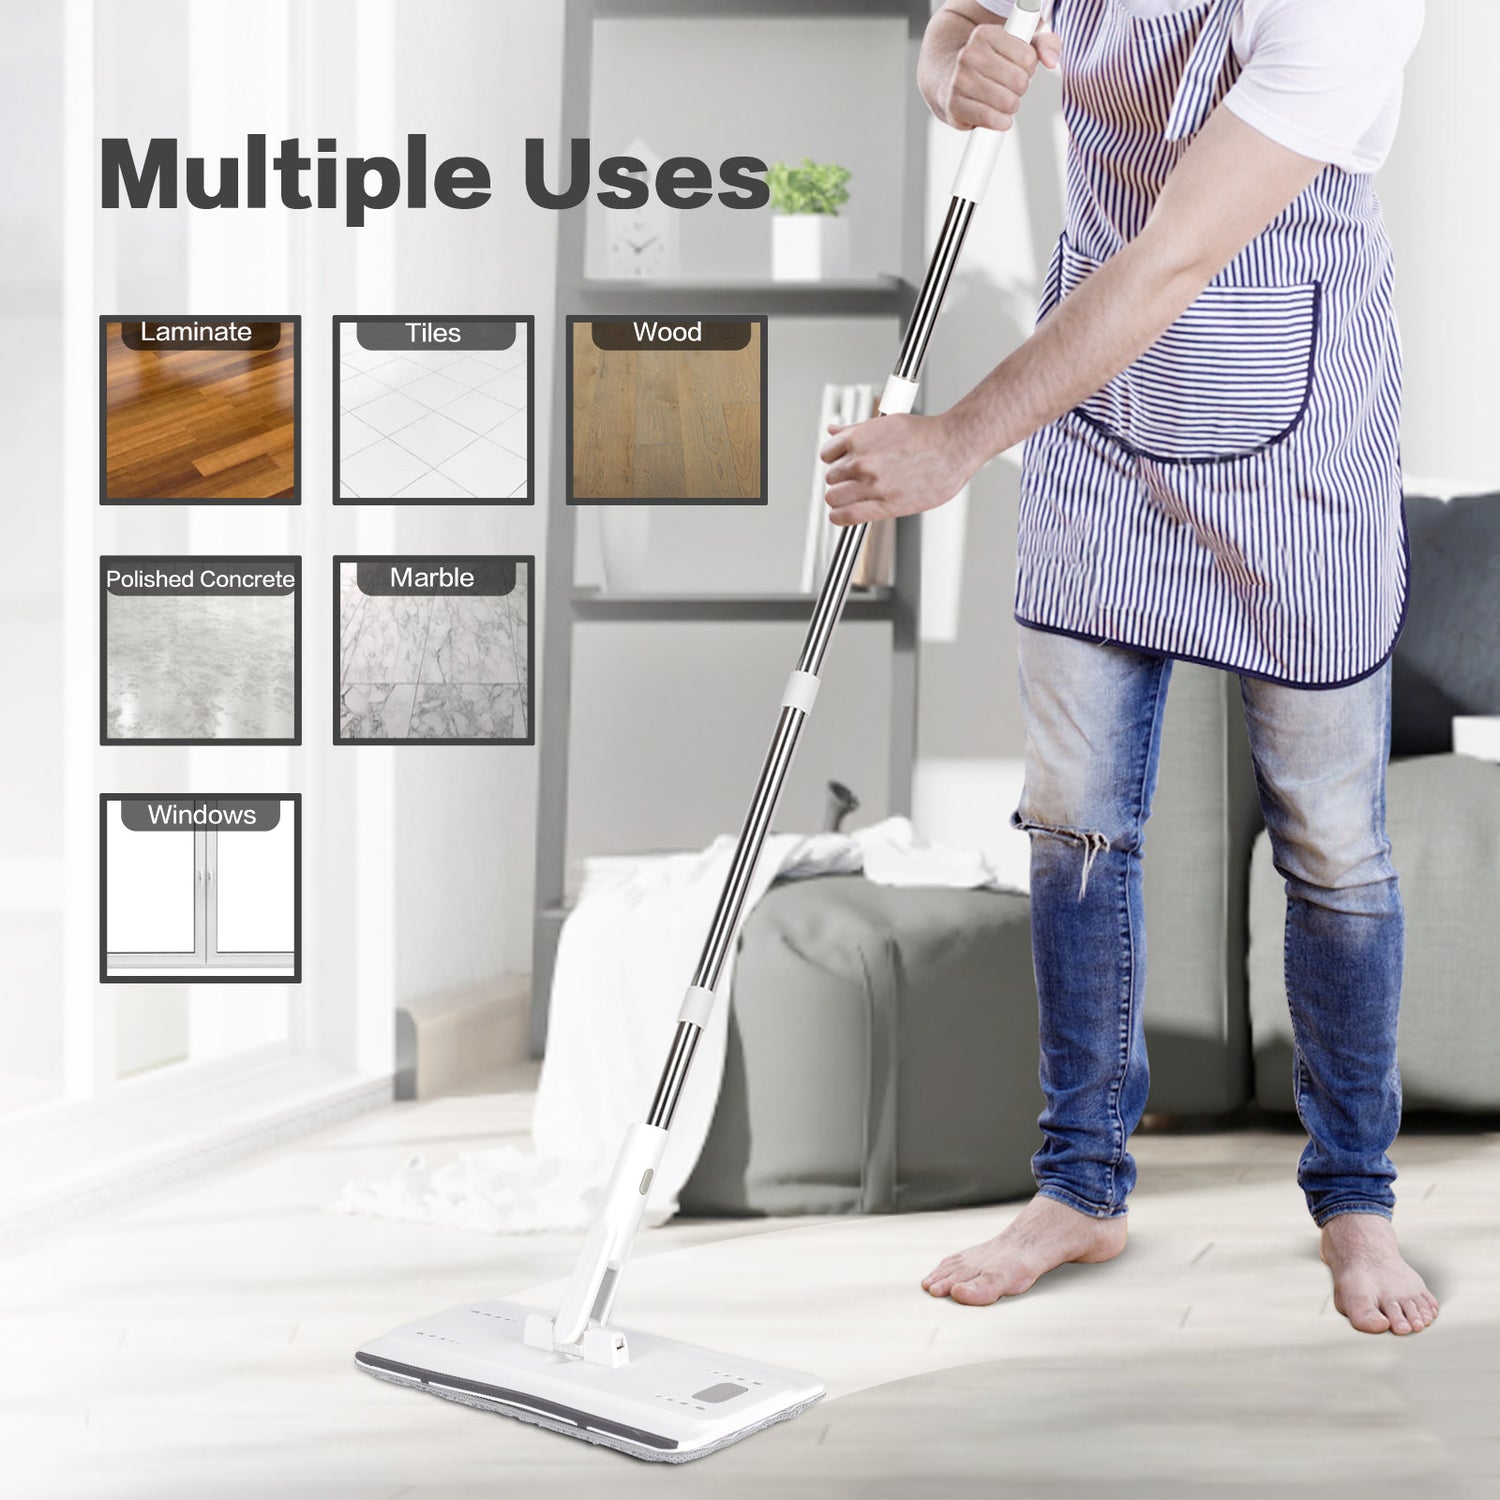 Masthome Flat Floor Mop and Bucket with Wringer Set, Household Mop and Bucket System for Floor Cleaning